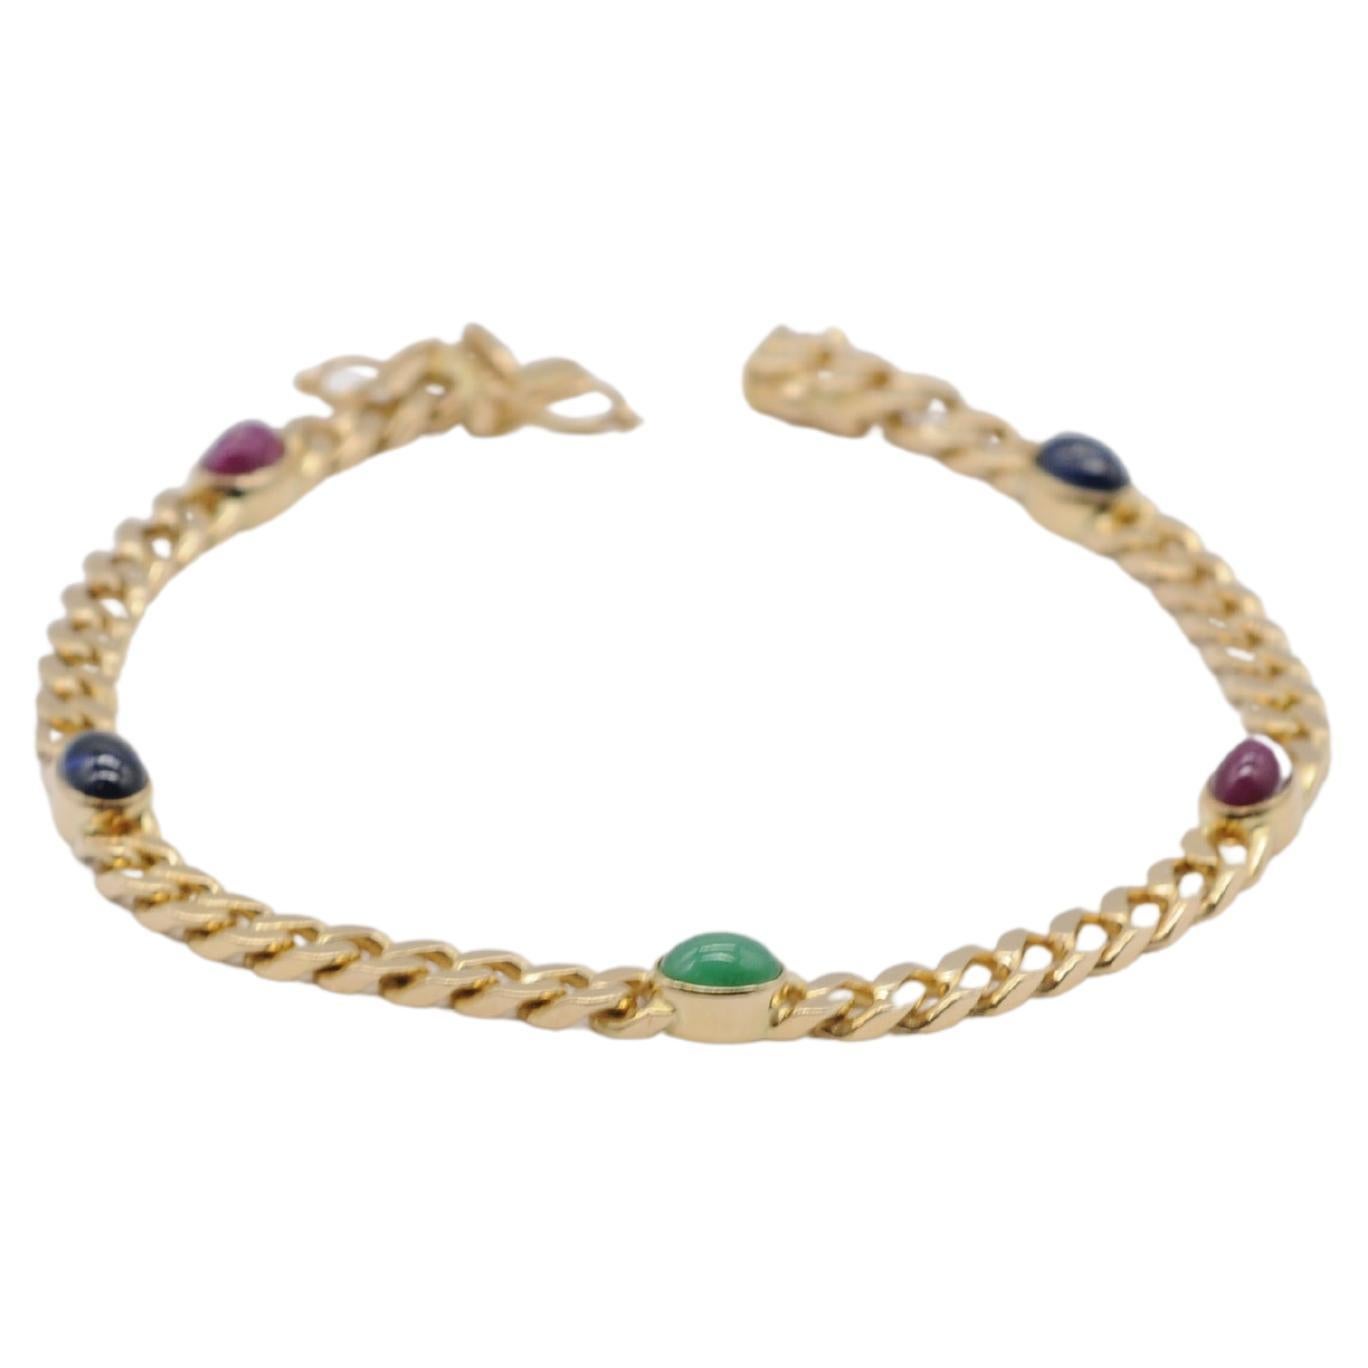 Noble 14k yellow gold bracelet with cabochon For Sale 3